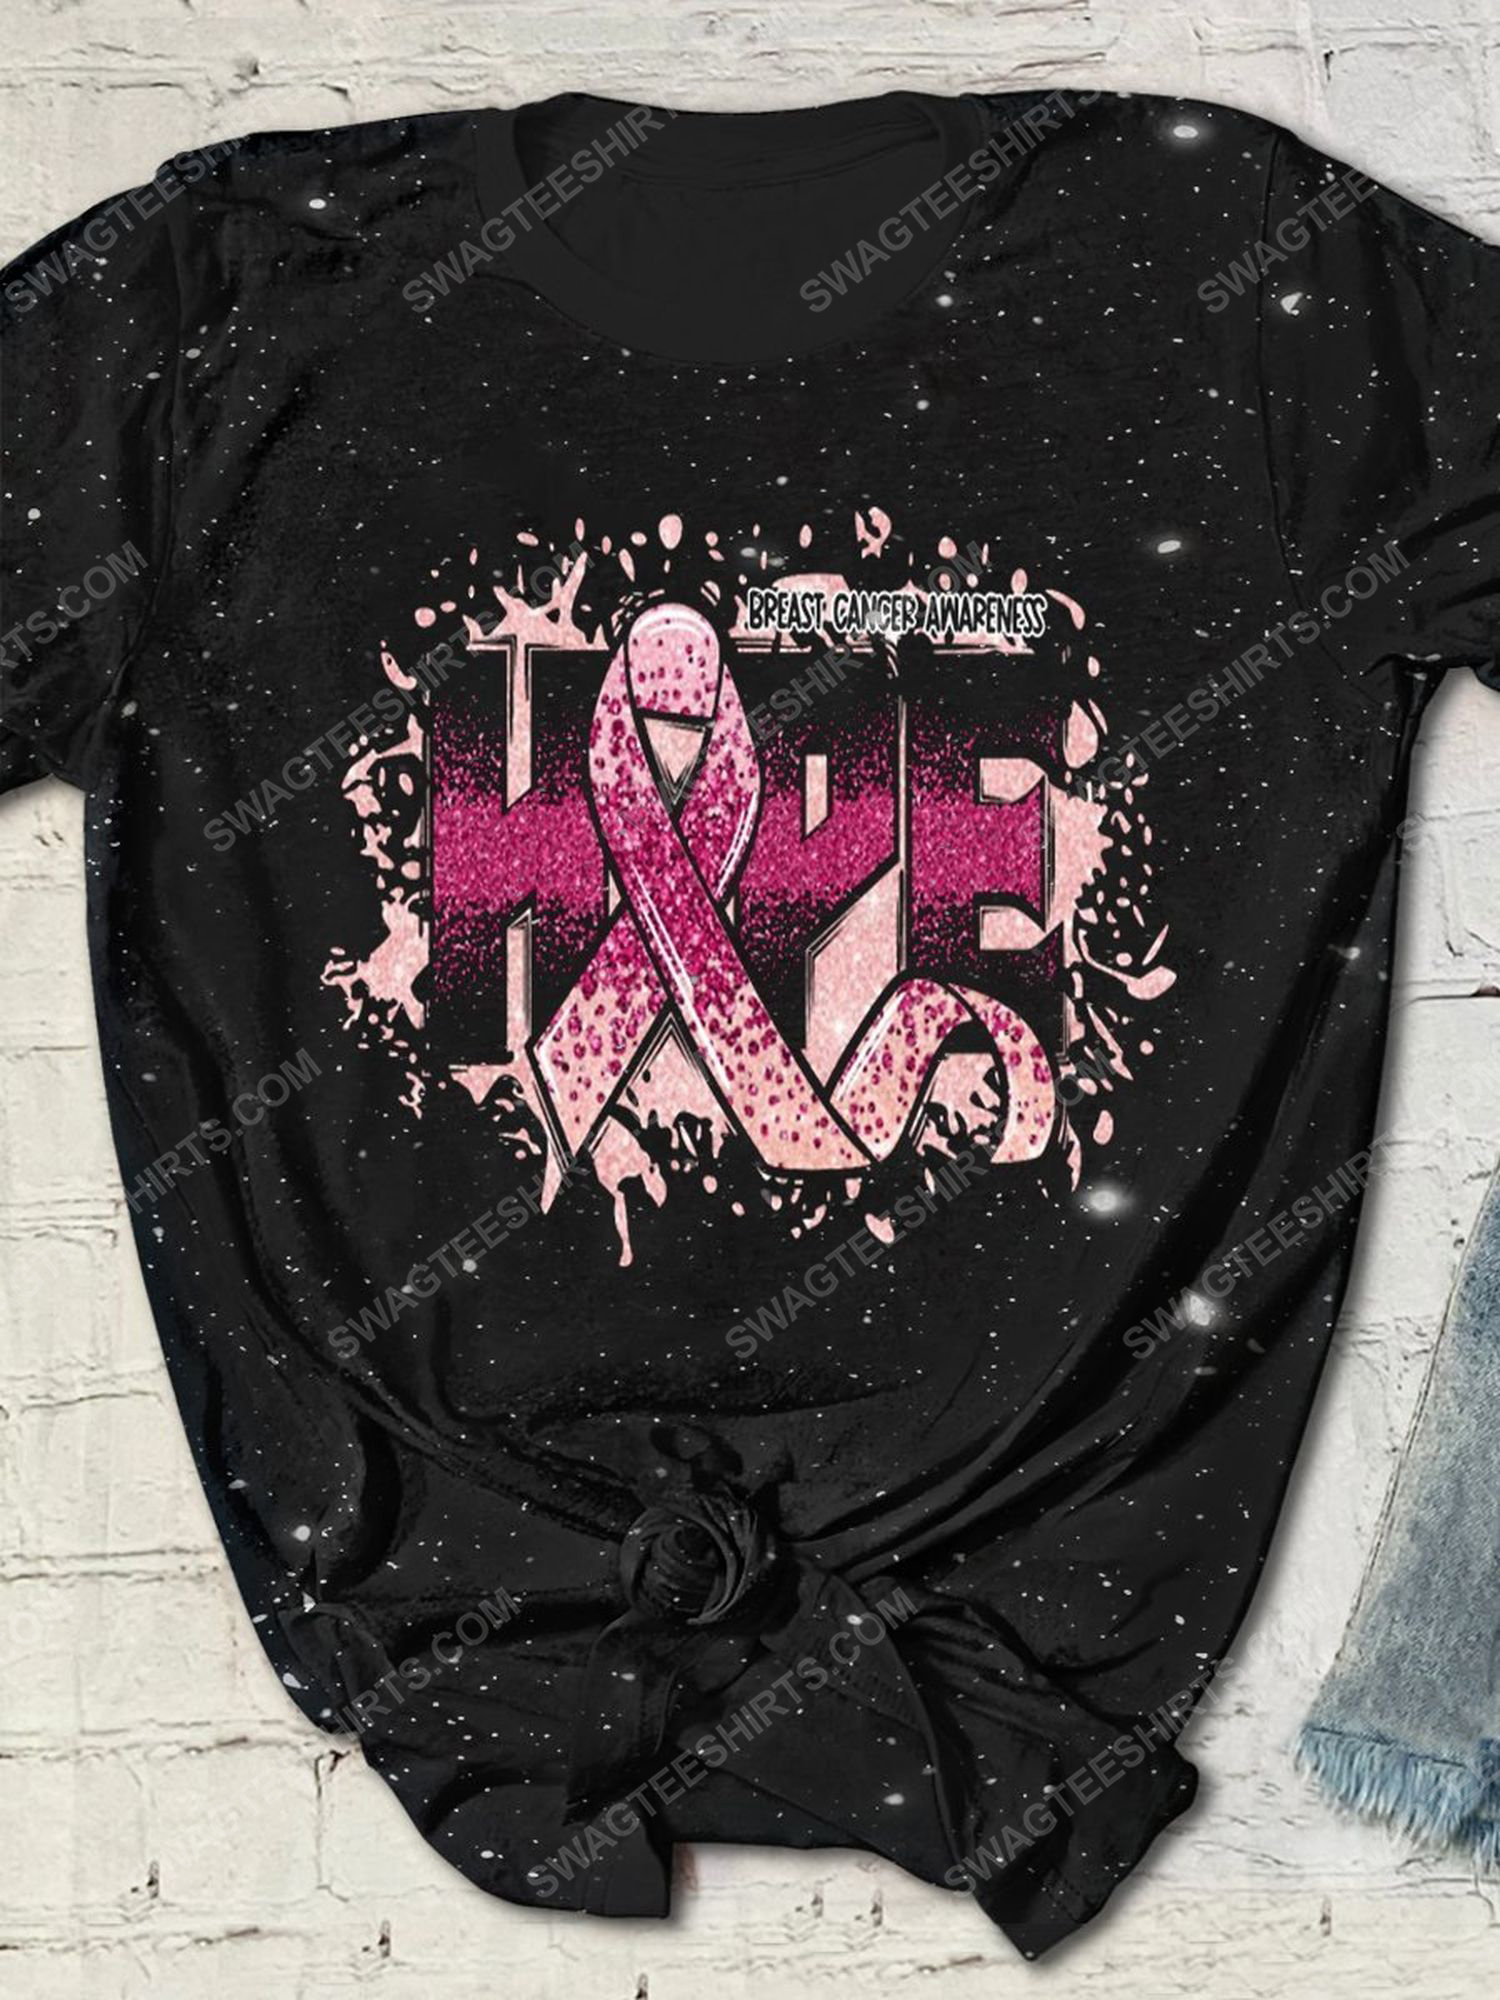 Breast cancer awareness hope bleached shirt 1 - Copy (2)